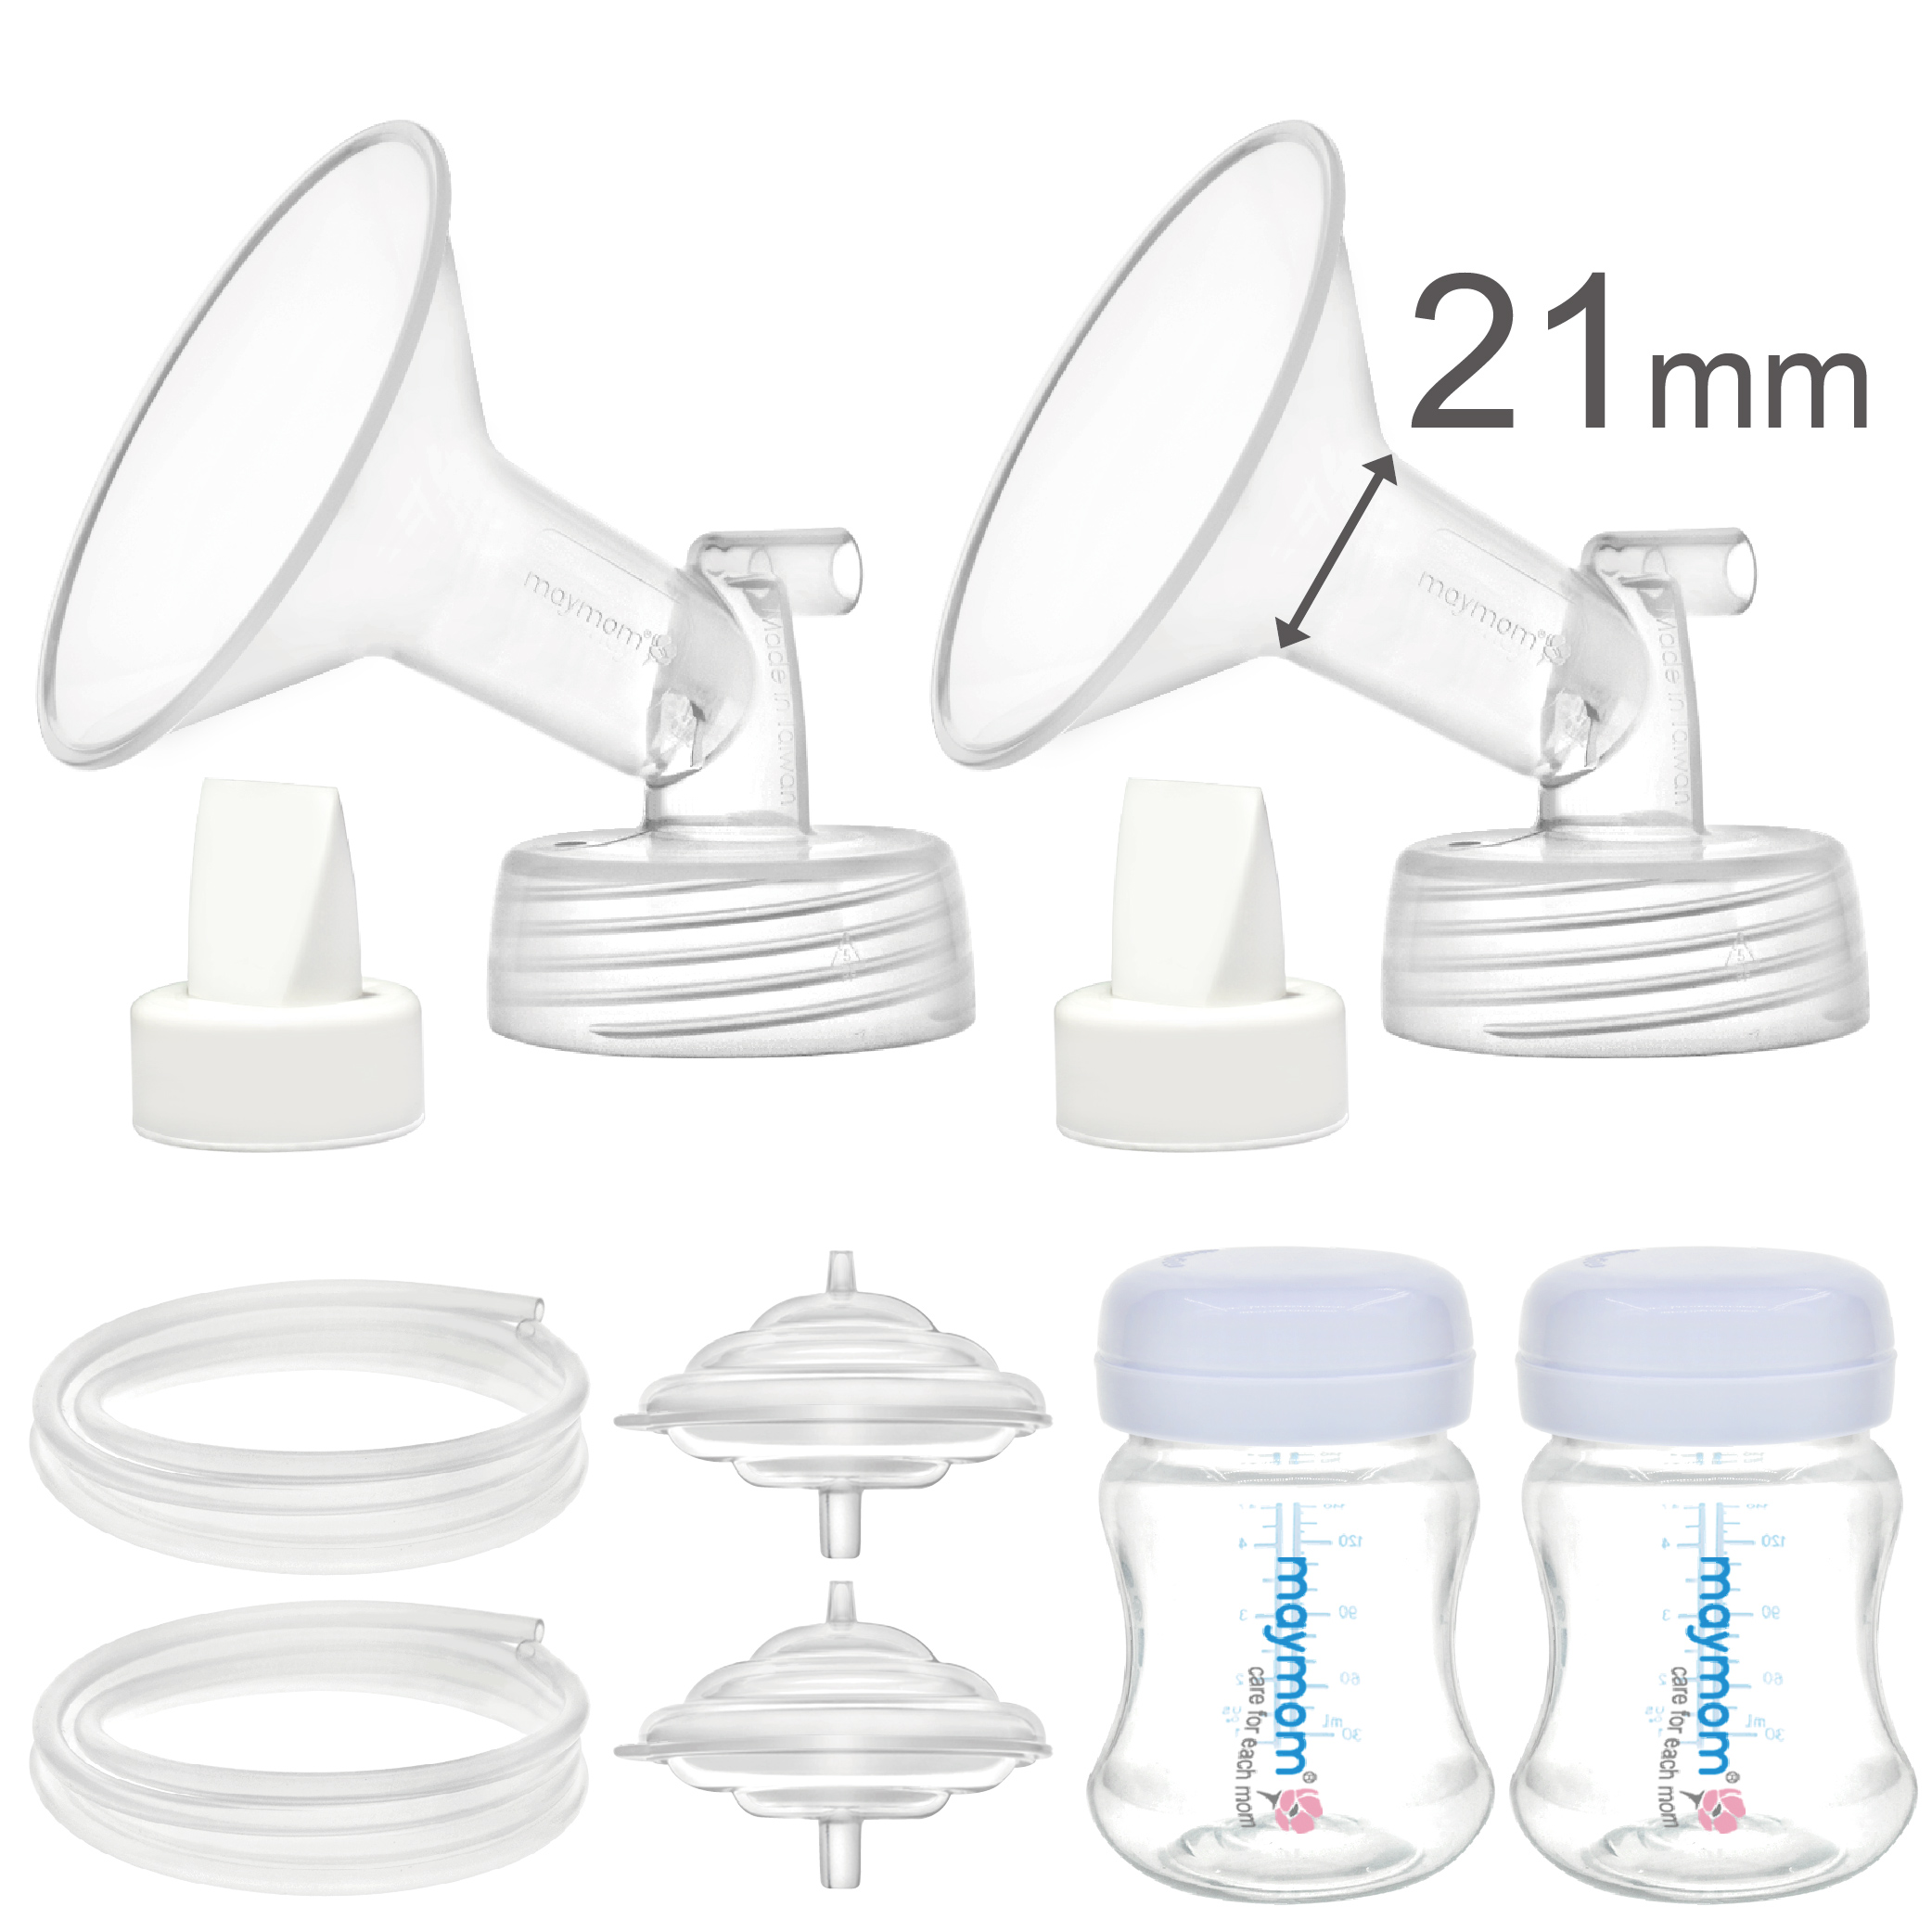 Papablic Breastmilk Storage Bag Adapters for Spectra S1 S2 4 Pack Avent Comfort Wide-Mouth Flanges to Pump into Lansinoh NUK Breastmilk Storage Bags 